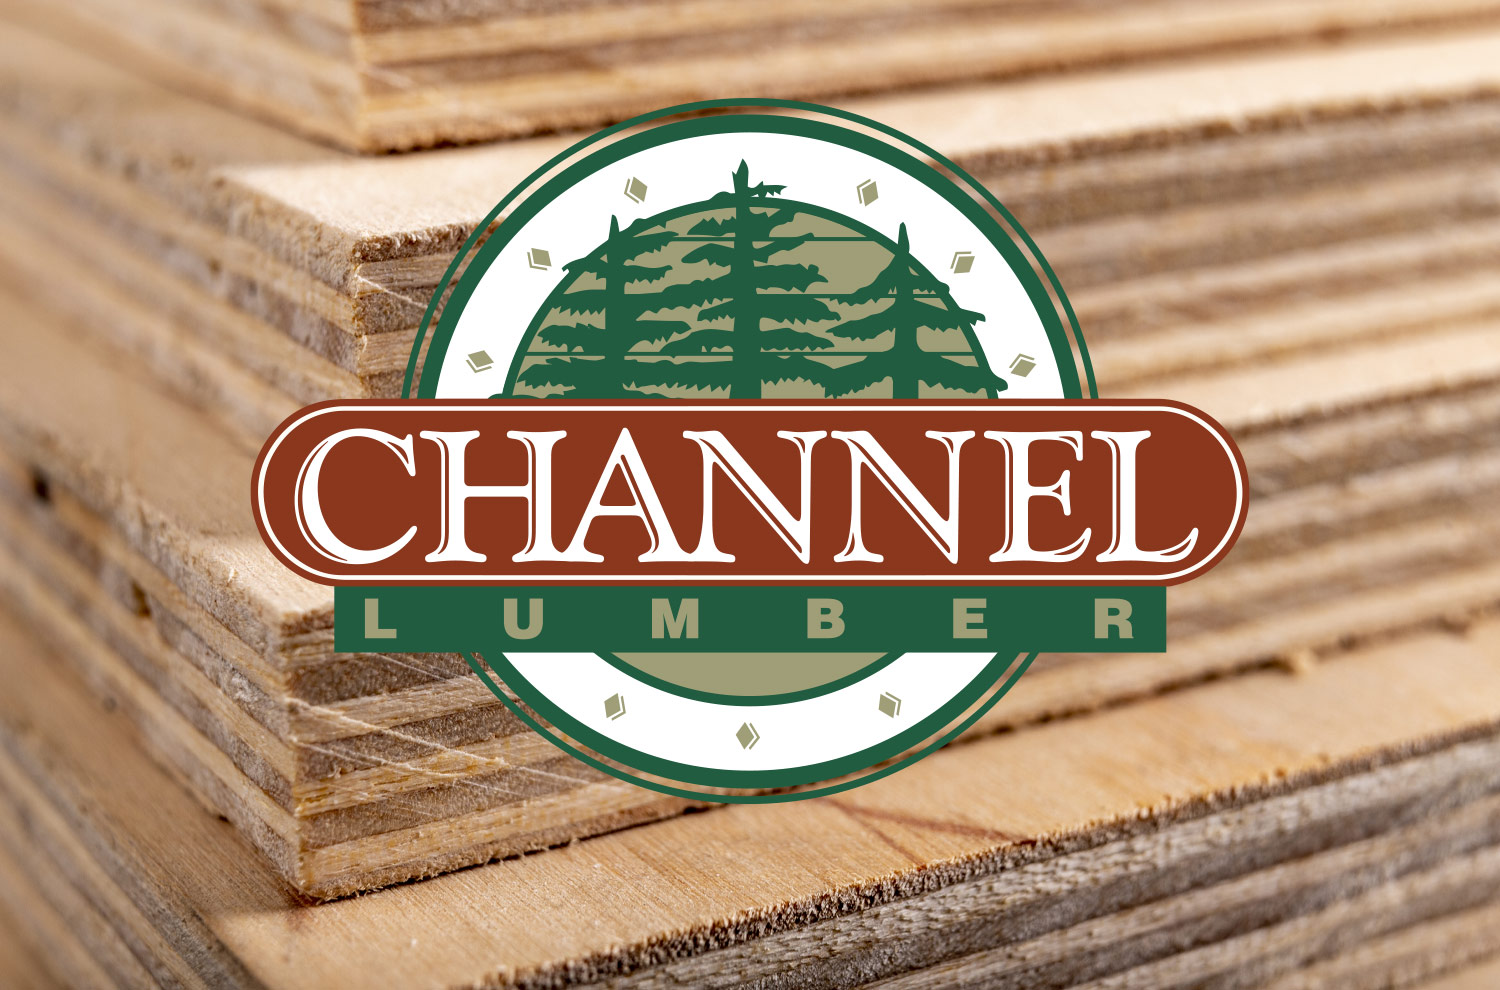 Image of Channel Lumber logo and plywood